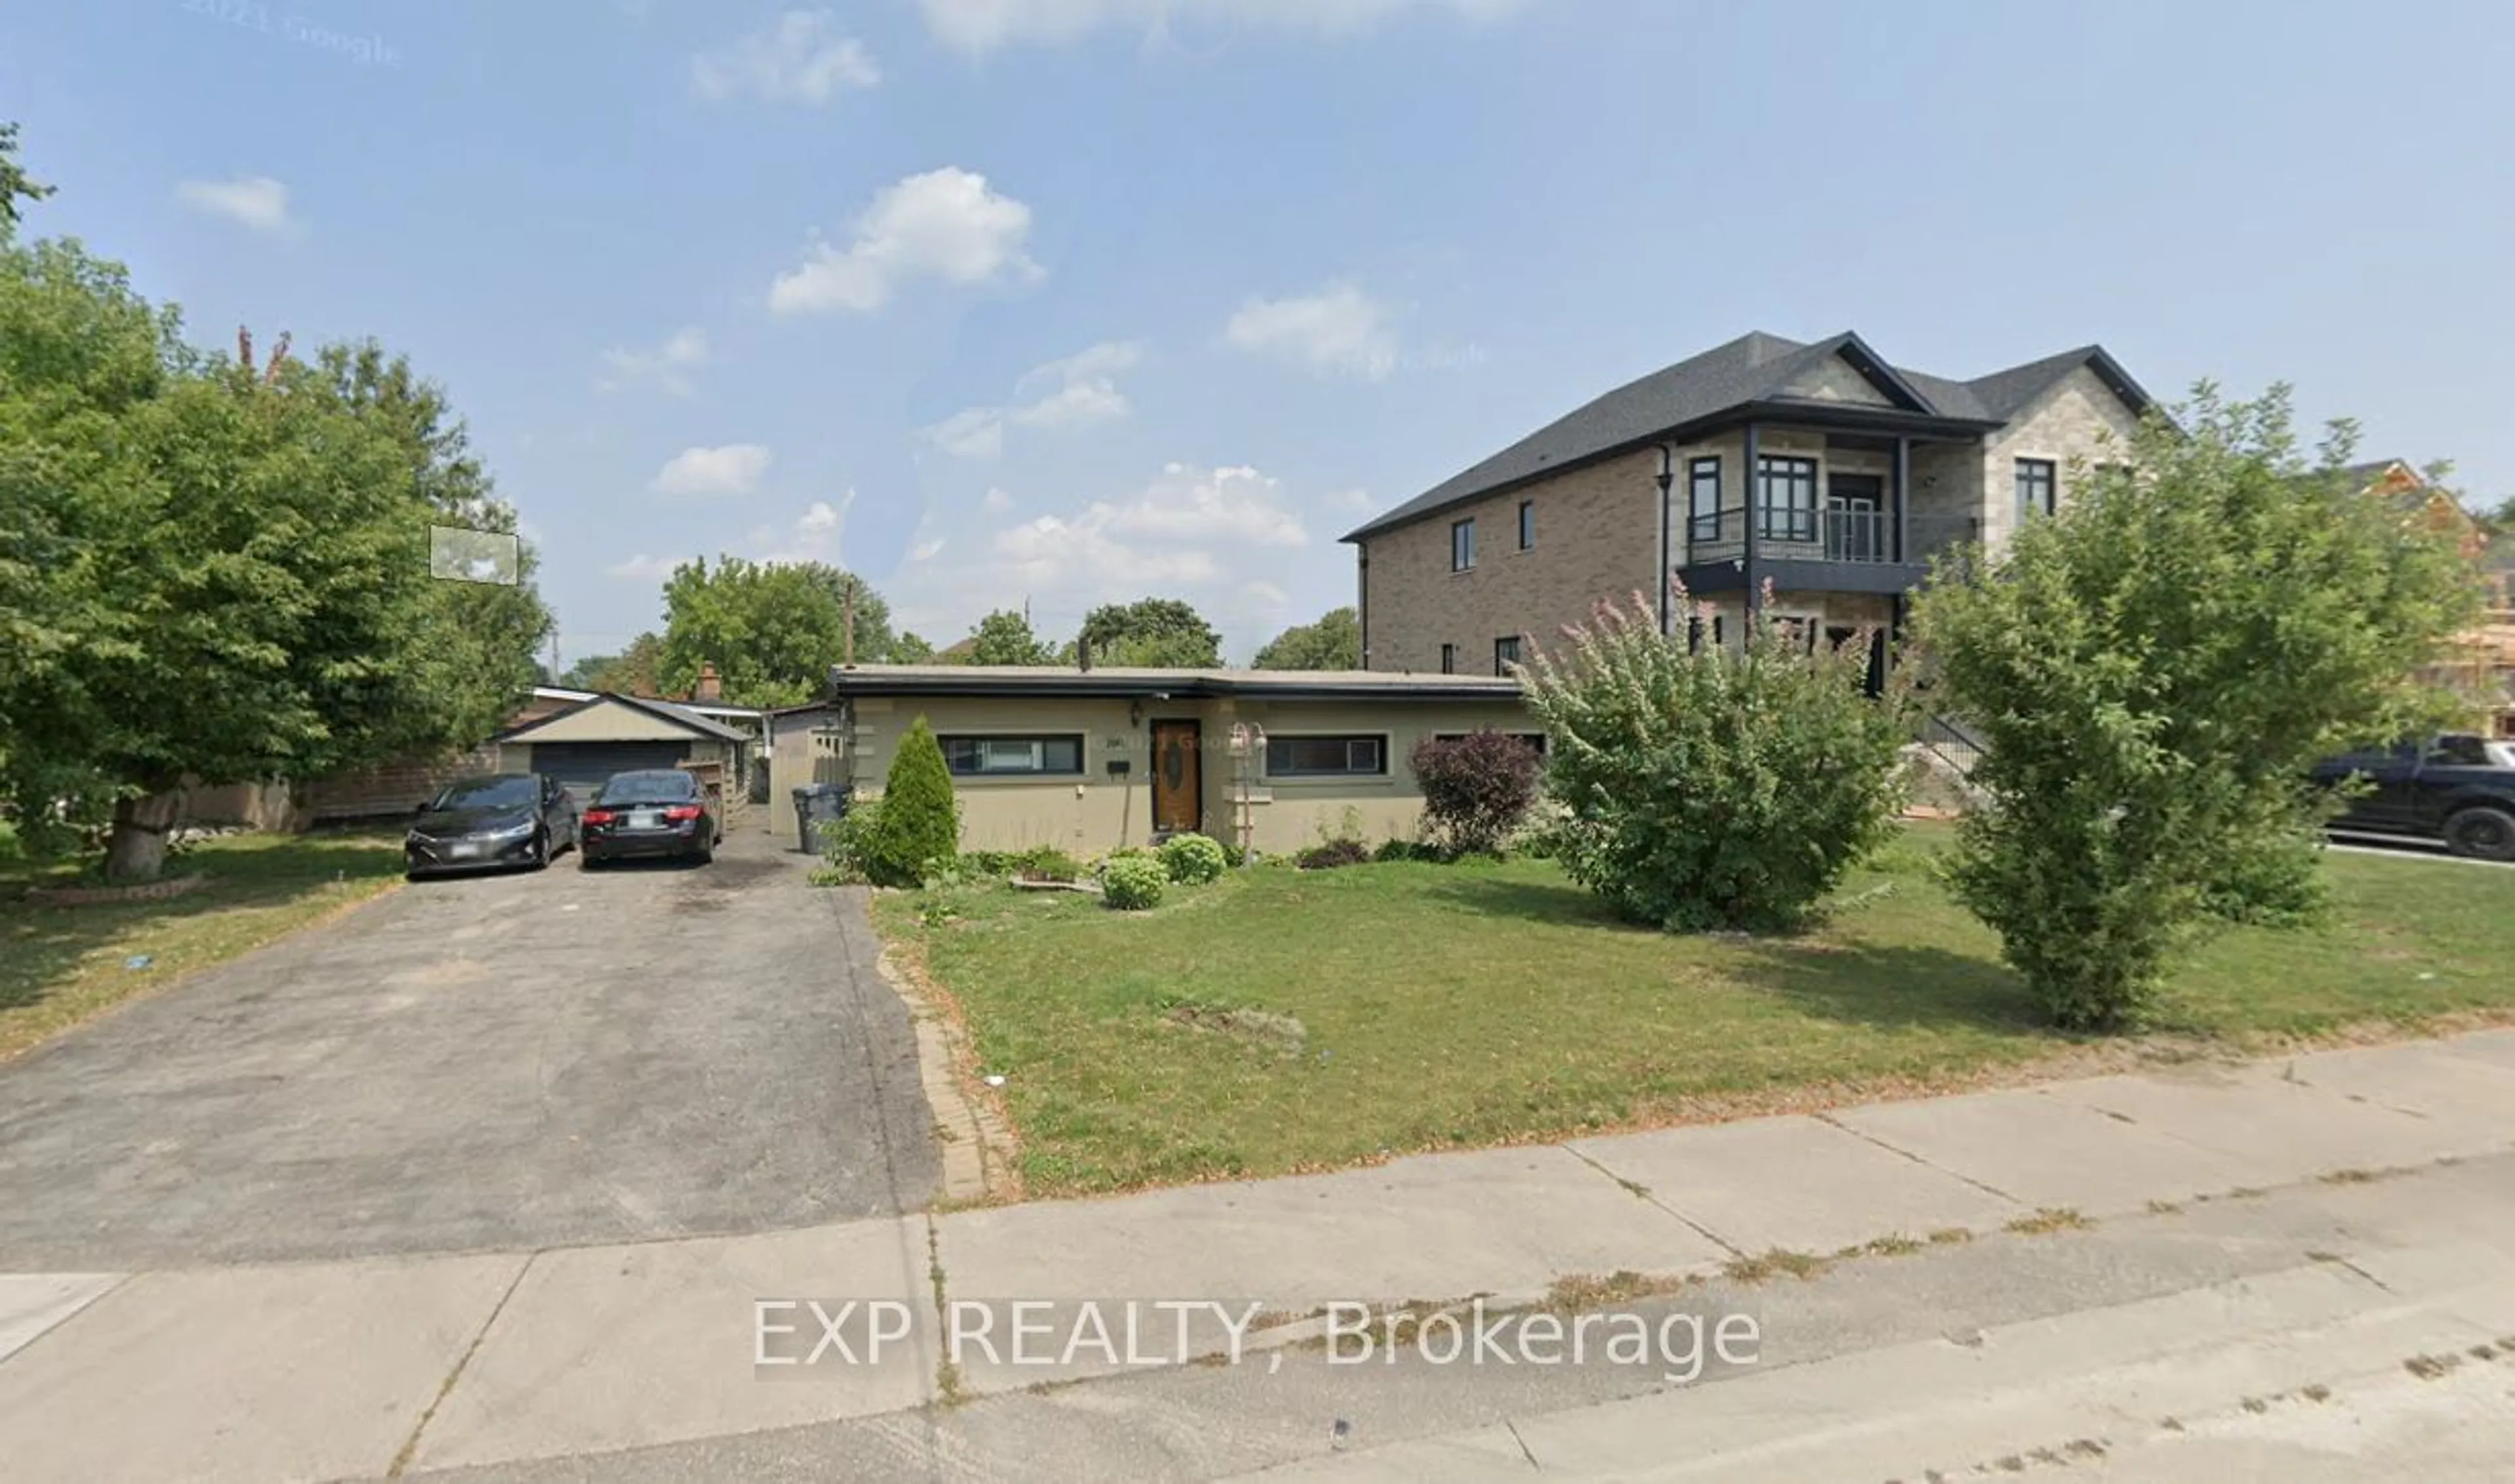 Frontside or backside of a home for 7501 Homeside Gdns, Mississauga Ontario L4T 2A8